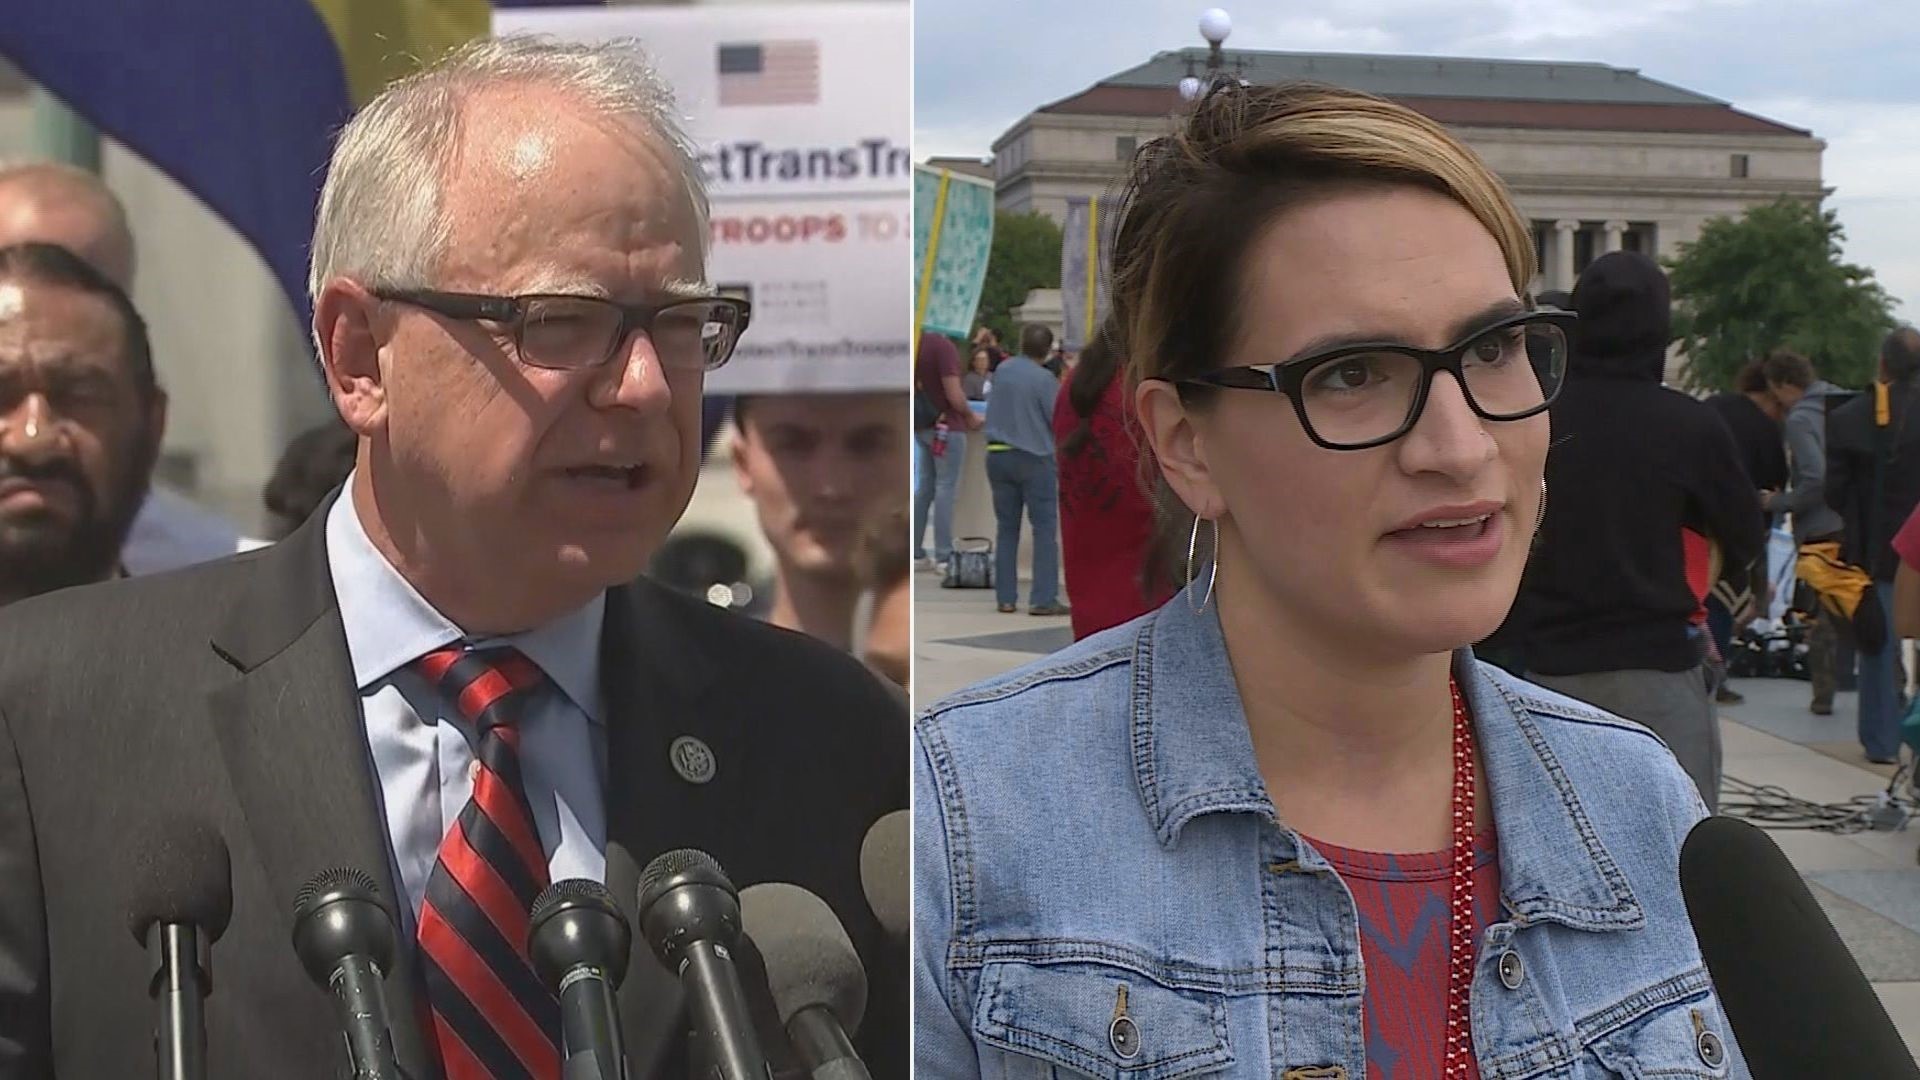 On Tuesday, Walz said he plans to run for Minnesota governor again with Lieutenant Governor Peggy Flanagan.